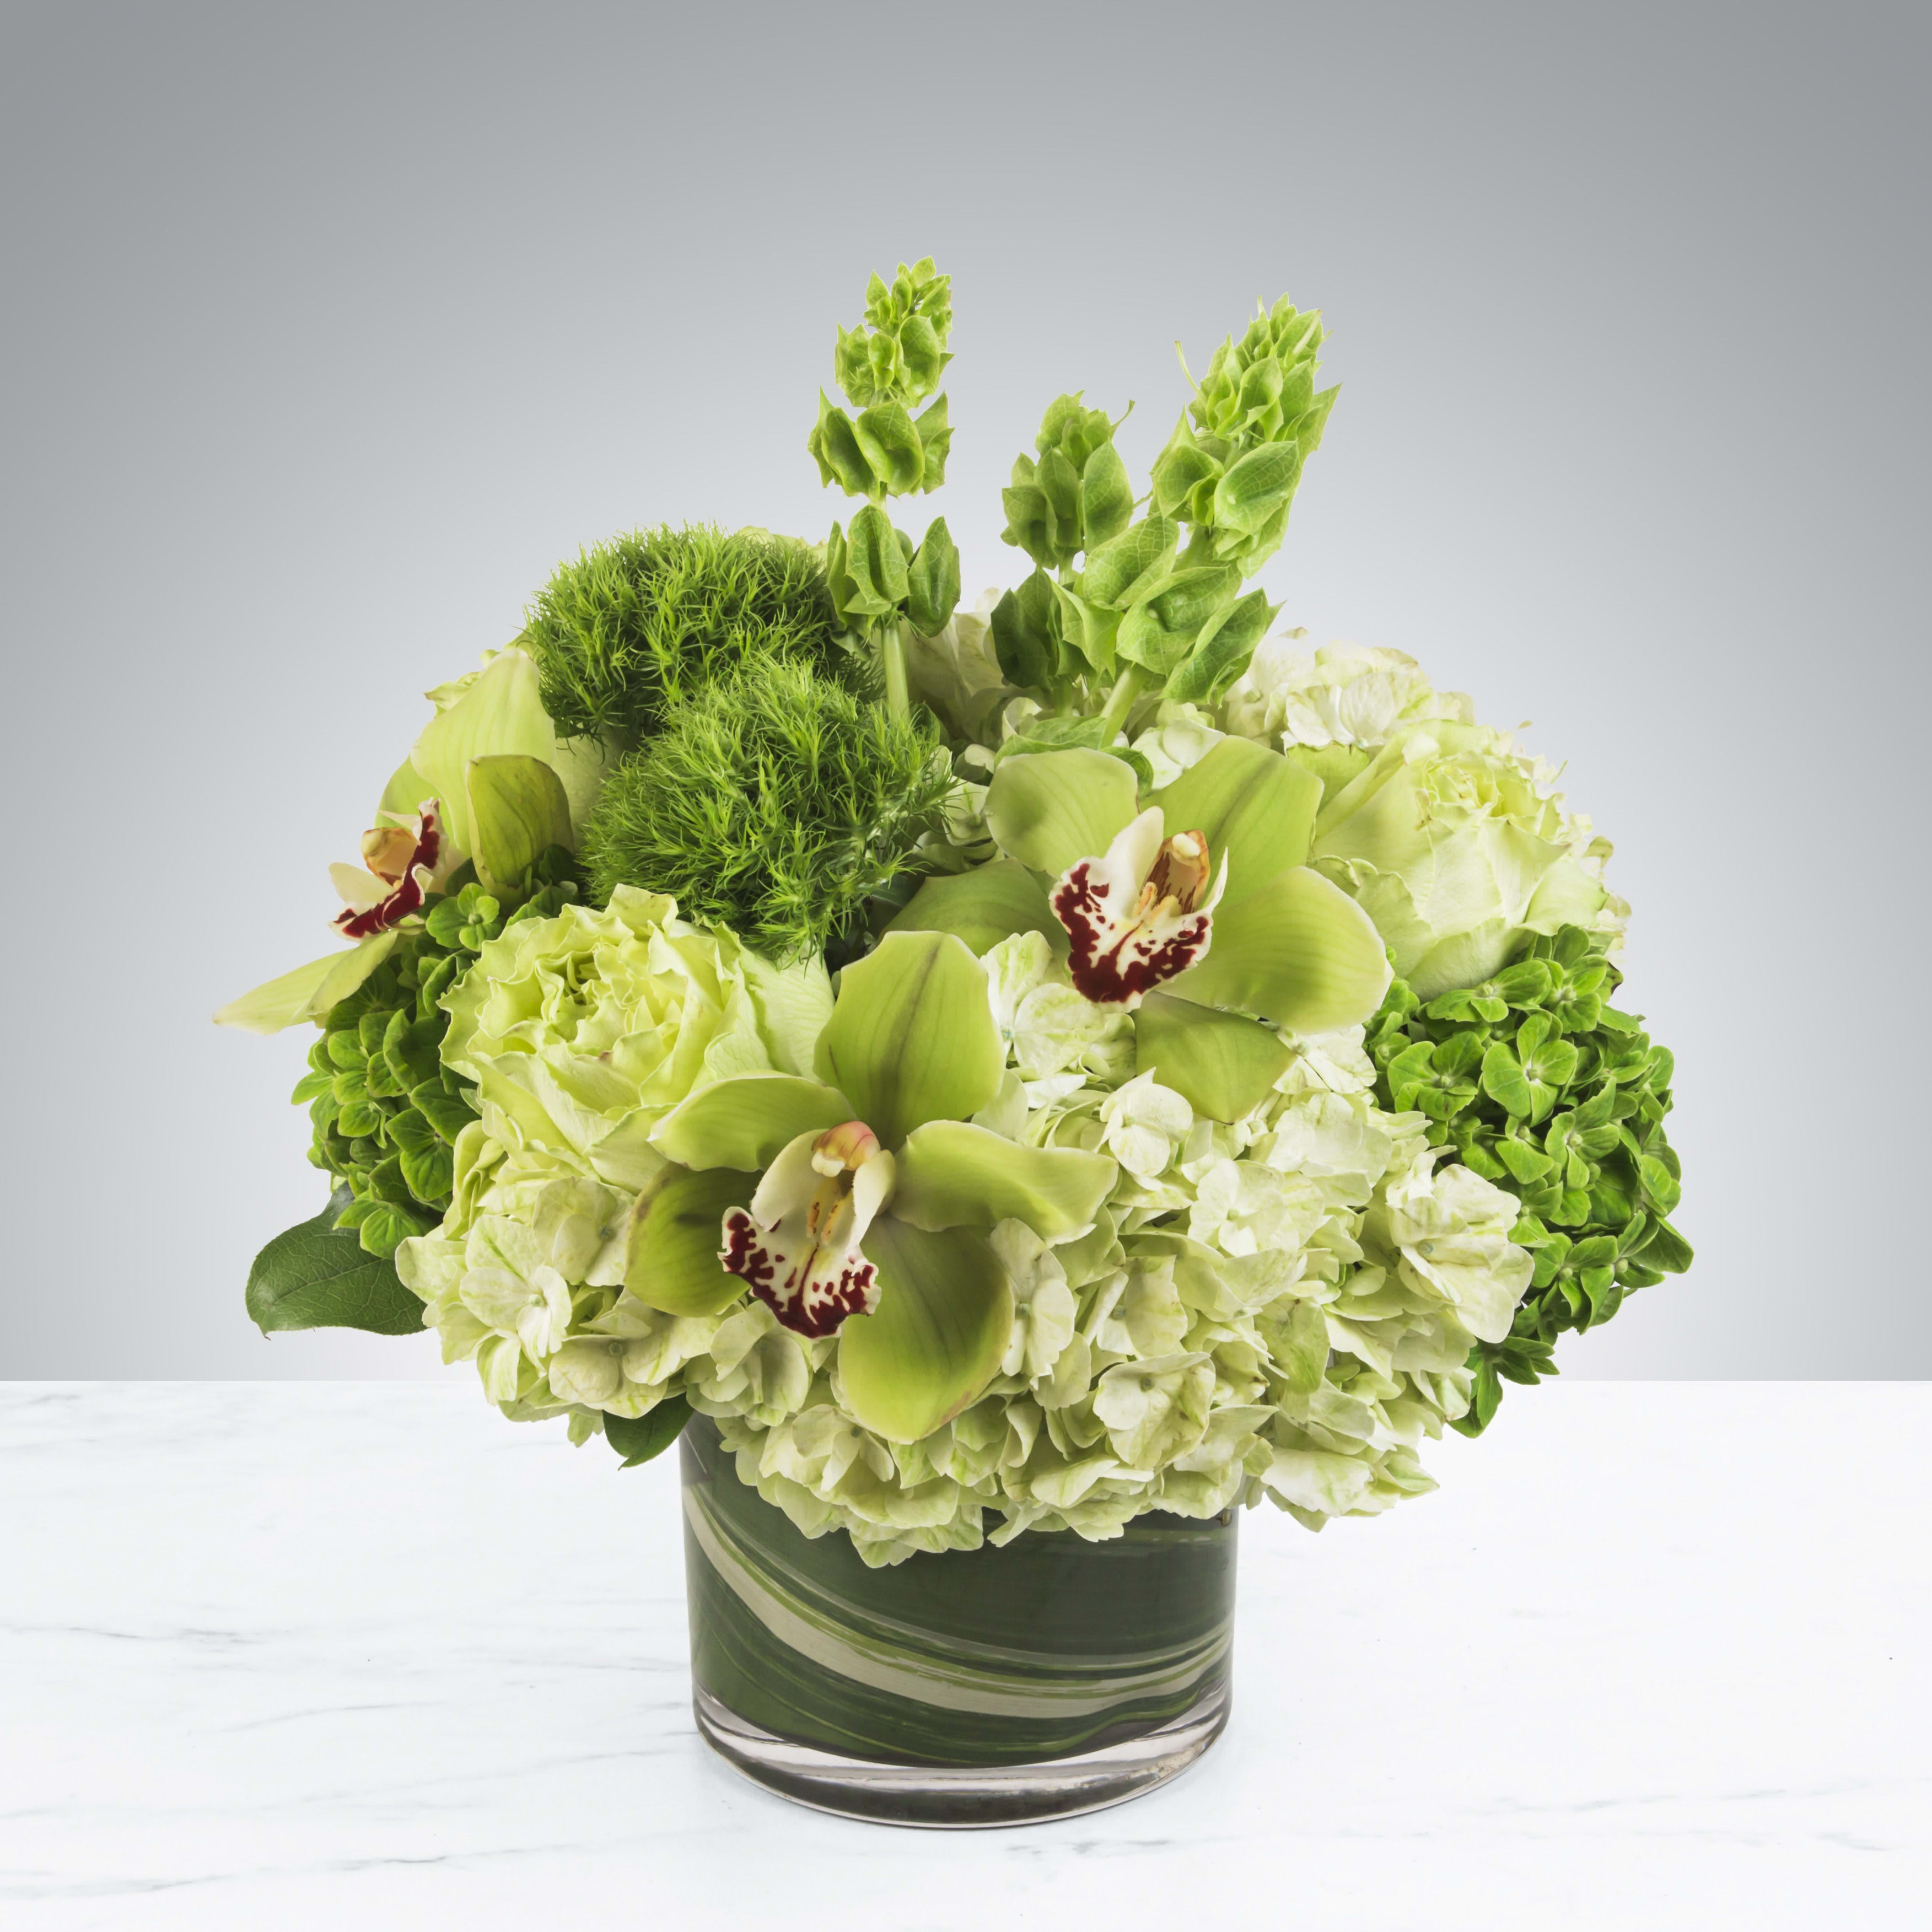 Serene Green - Pretty in pastel shades of green in a cylinder vase conjure up thoughts of relaxing summer days.  